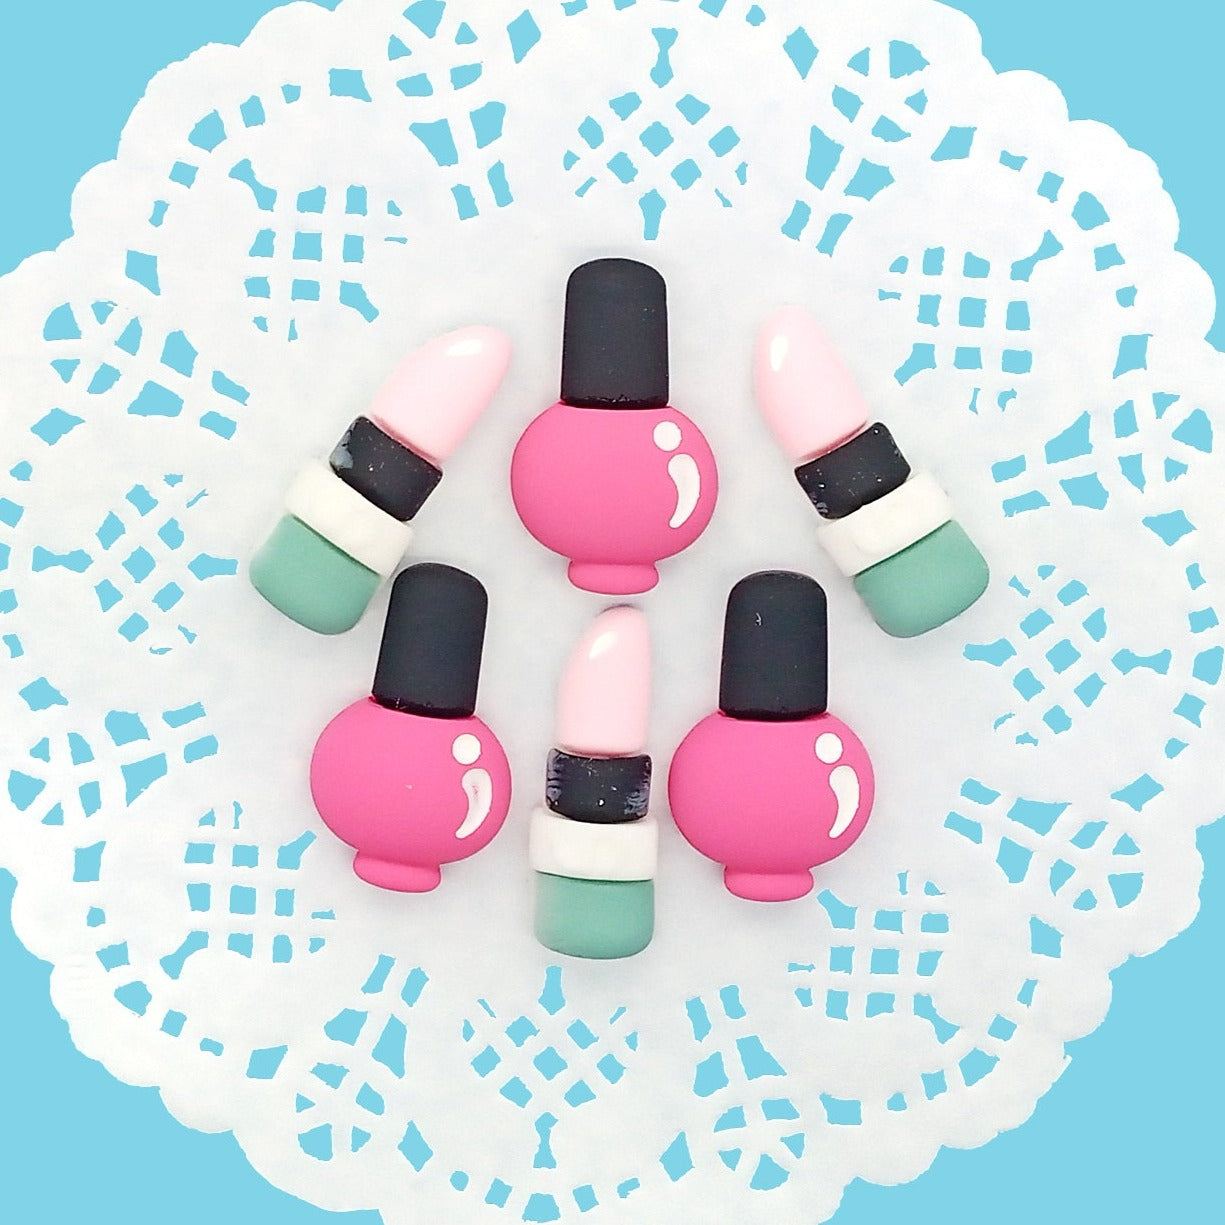 Nail polish and lipstick makeup resin flatback cabochons in pink blue and black.